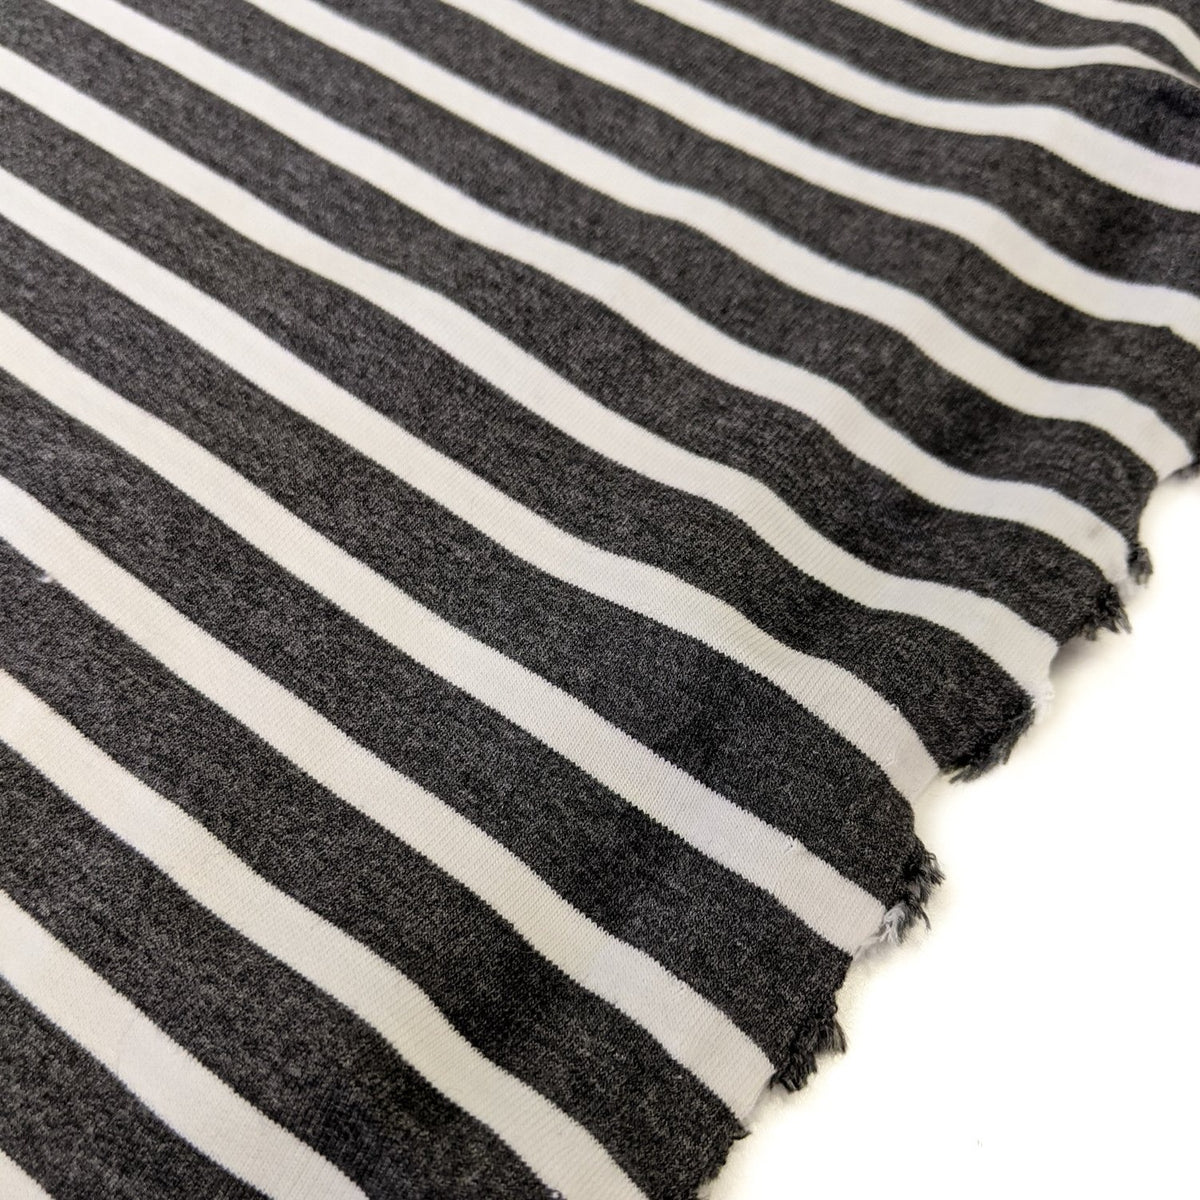 Striped Bamboo Stretch French Terry - Charcoal/Ecru